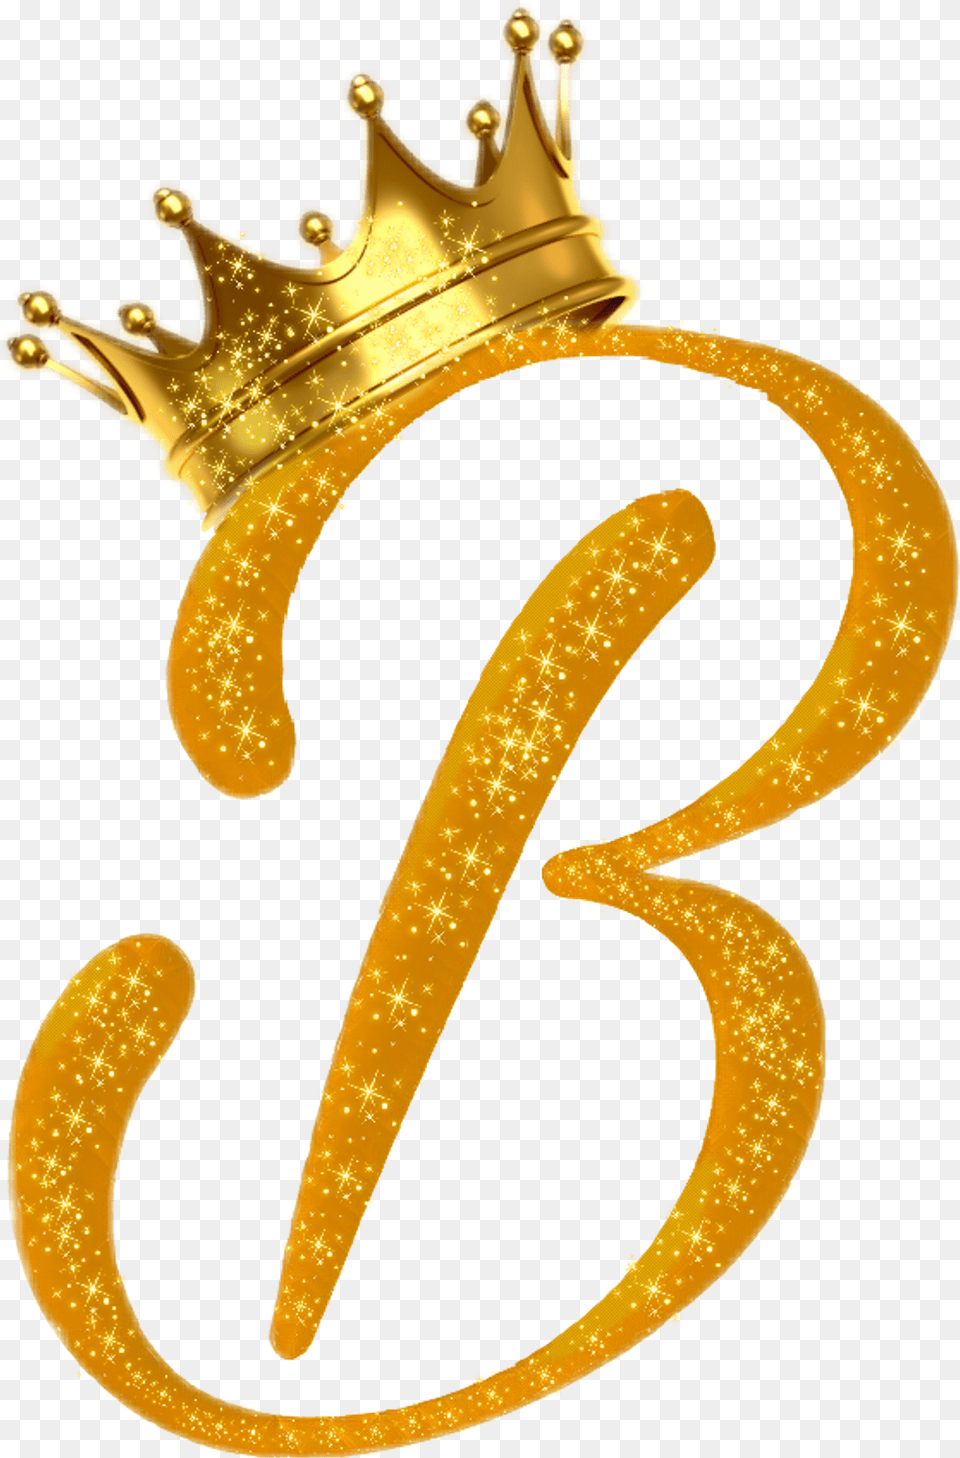 Download Letters Letter B Gold Crown Royal Clip Library Gold Letter B With Crown, Accessories, Jewelry Png Image